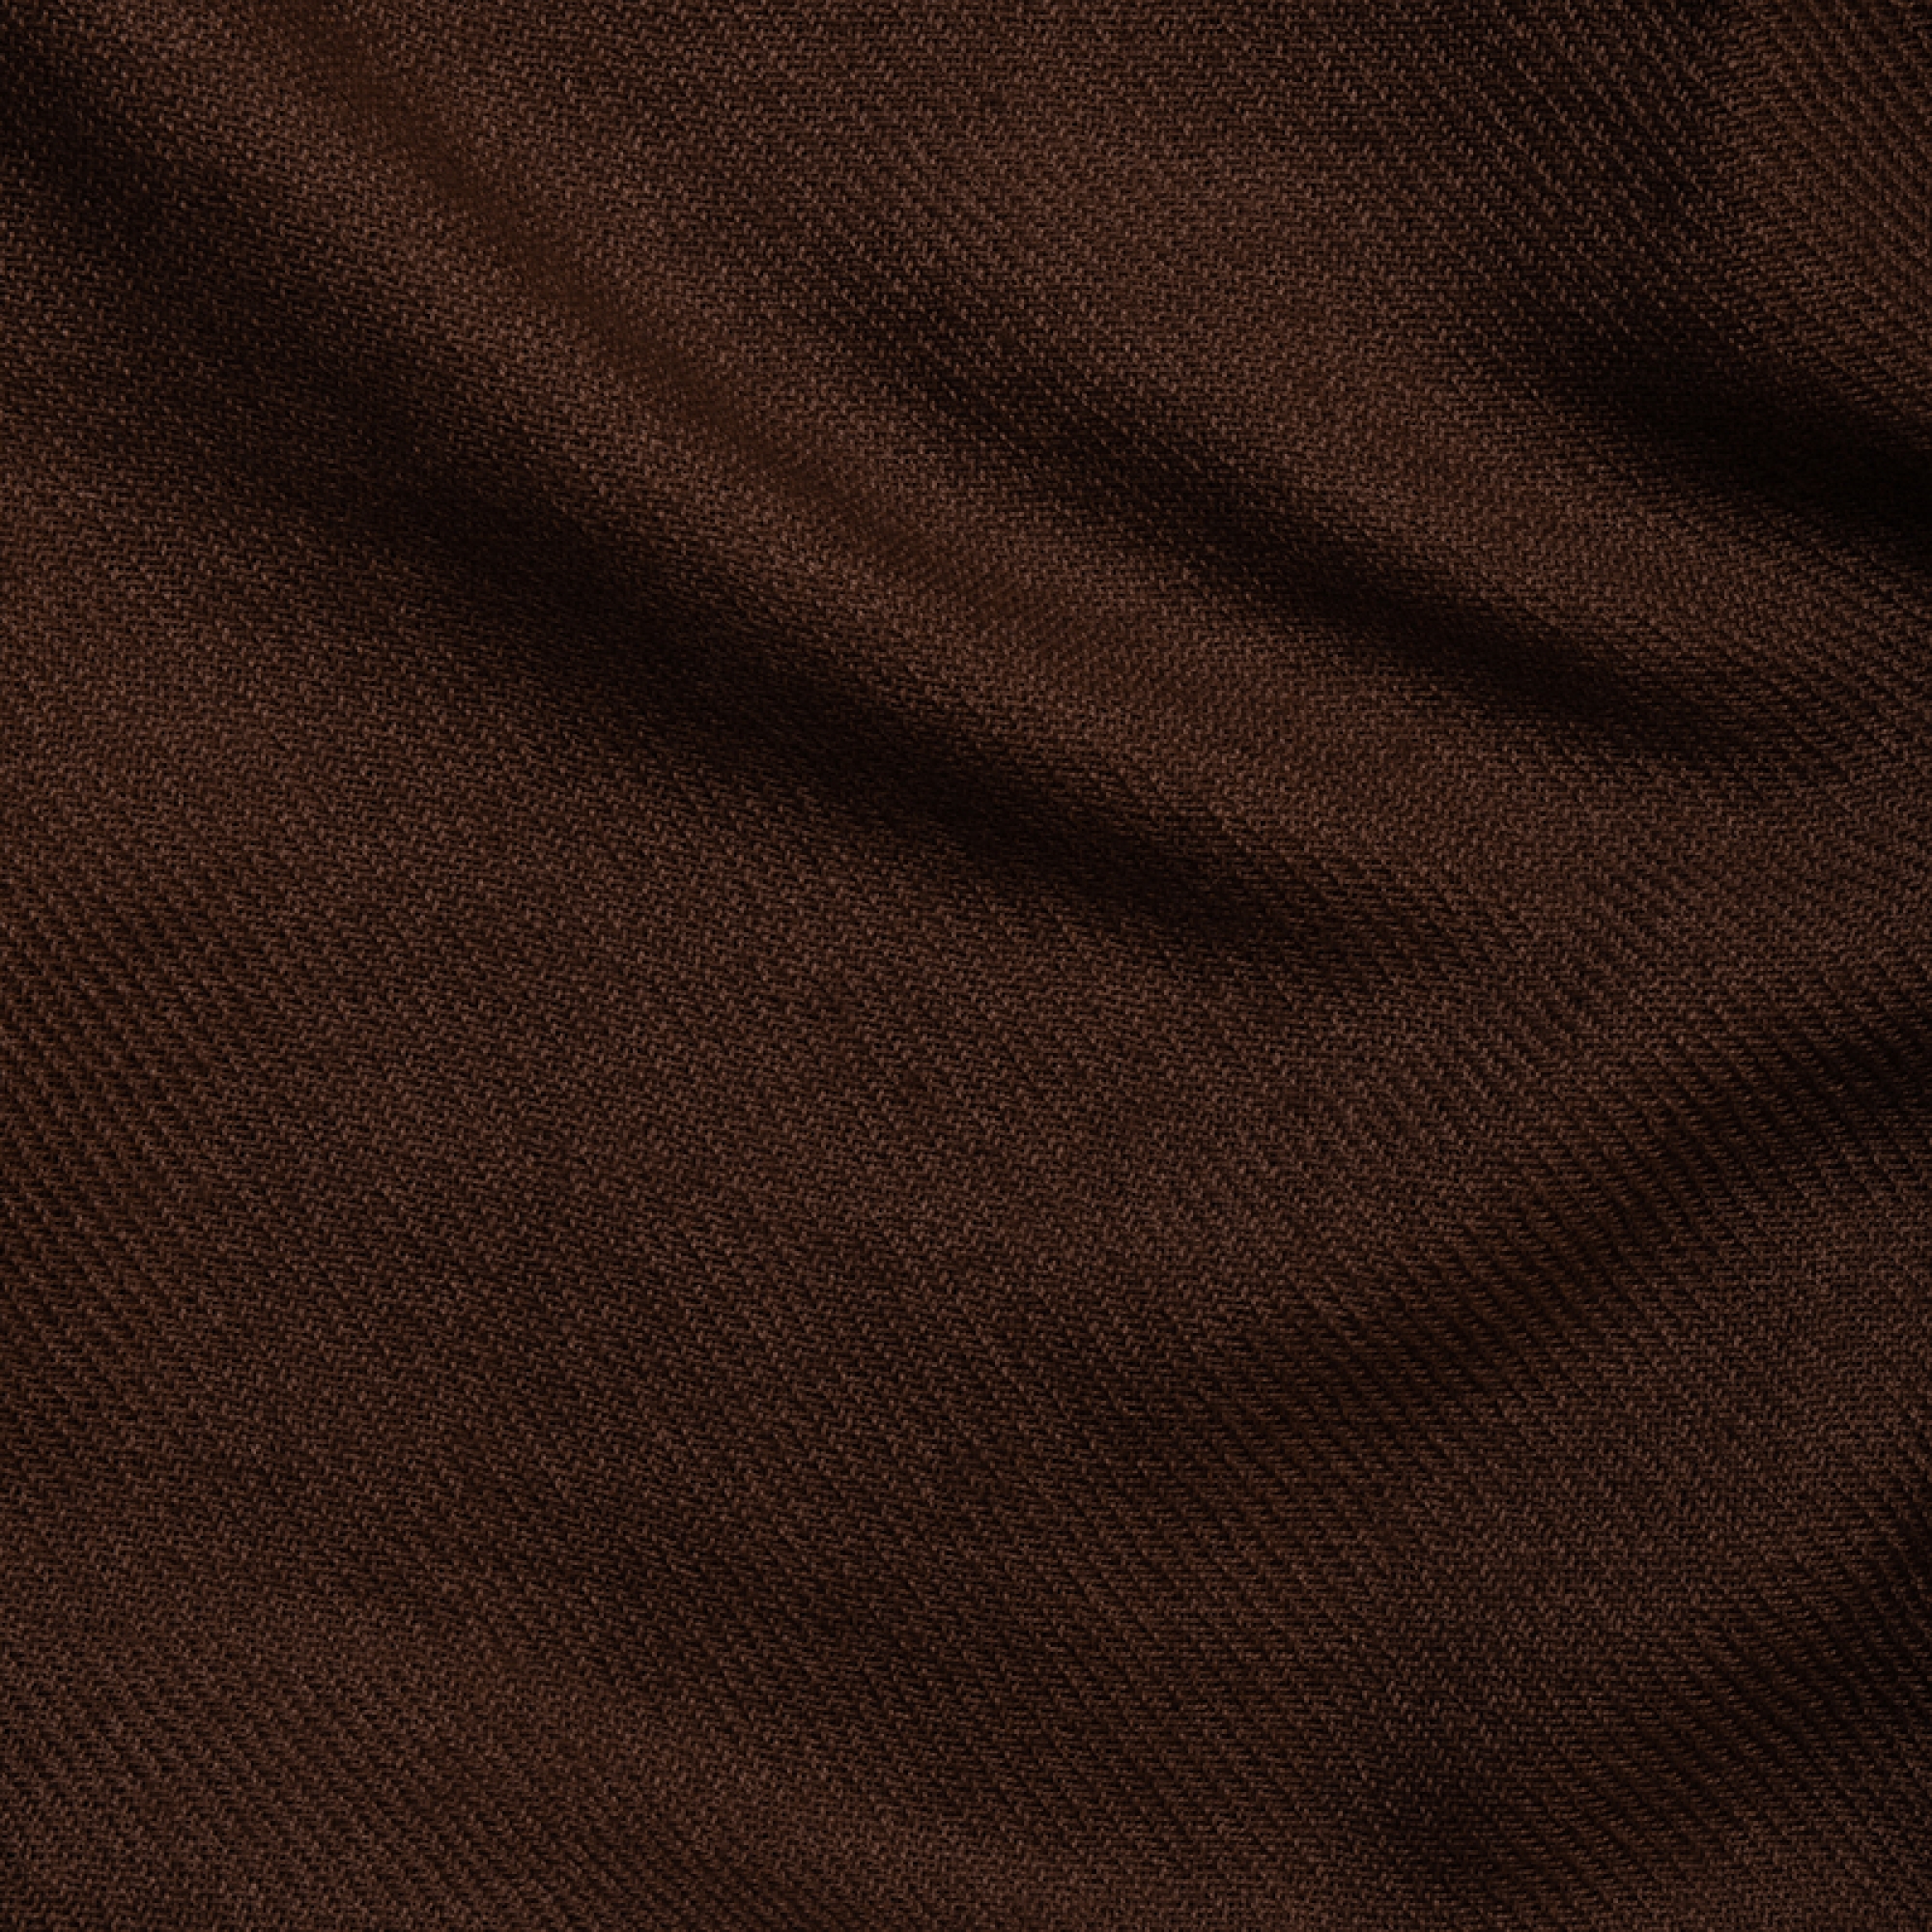 Cashmere accessories blanket toodoo plain m 180 x 220 cacao 180 x 220 cm